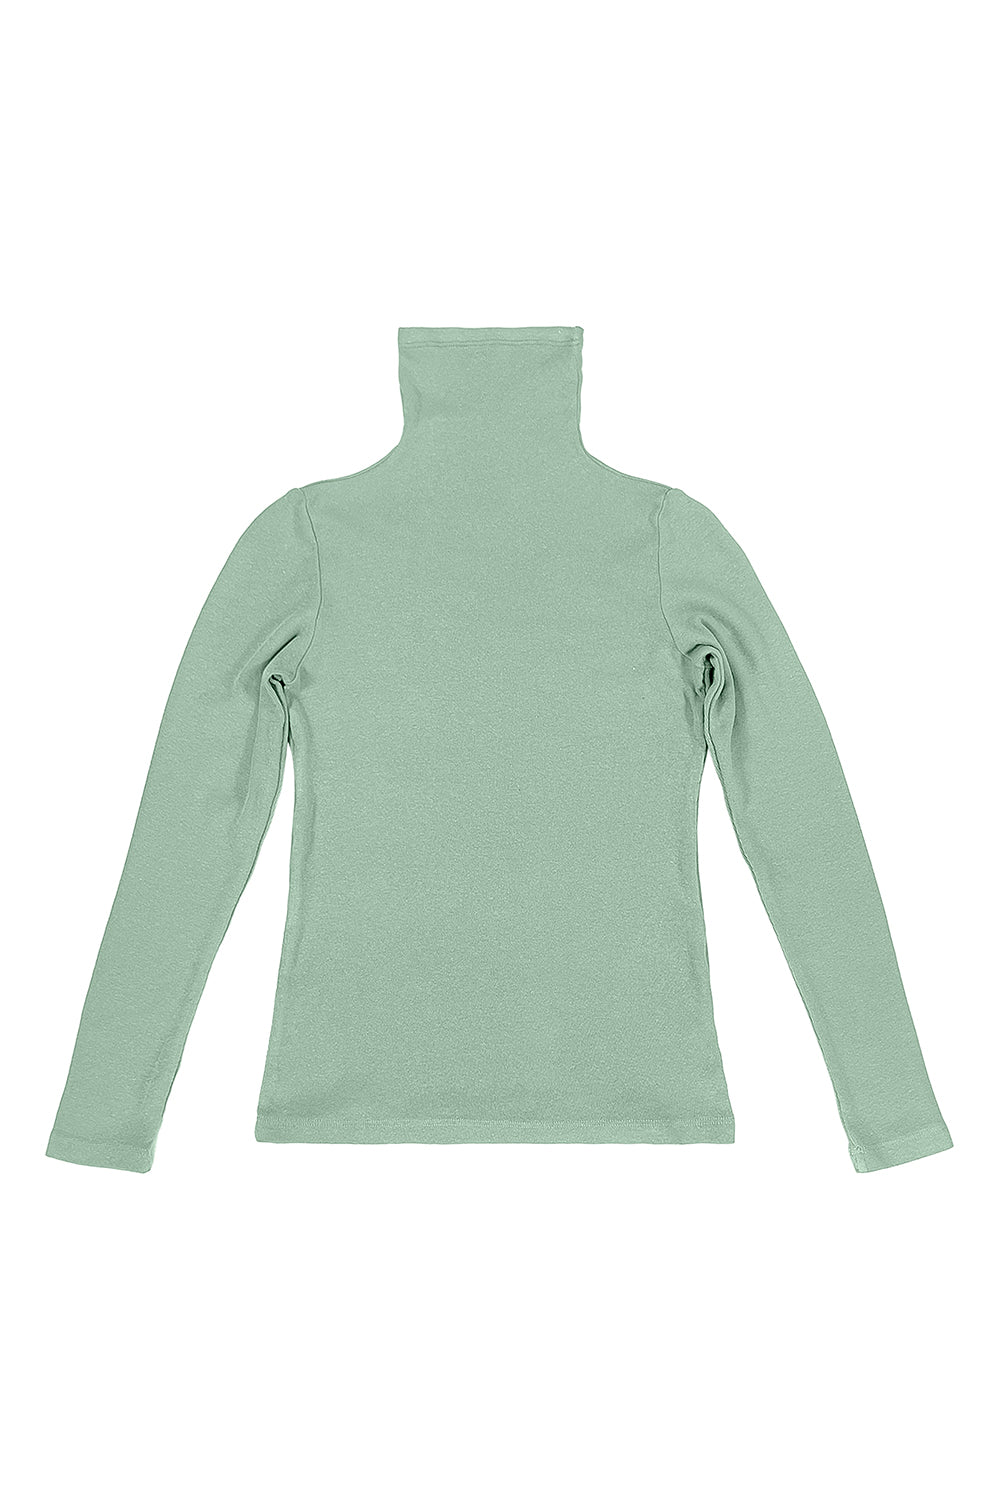 Whidbey Turtleneck | Jungmaven Hemp Clothing & Accessories / Color: Sage Green